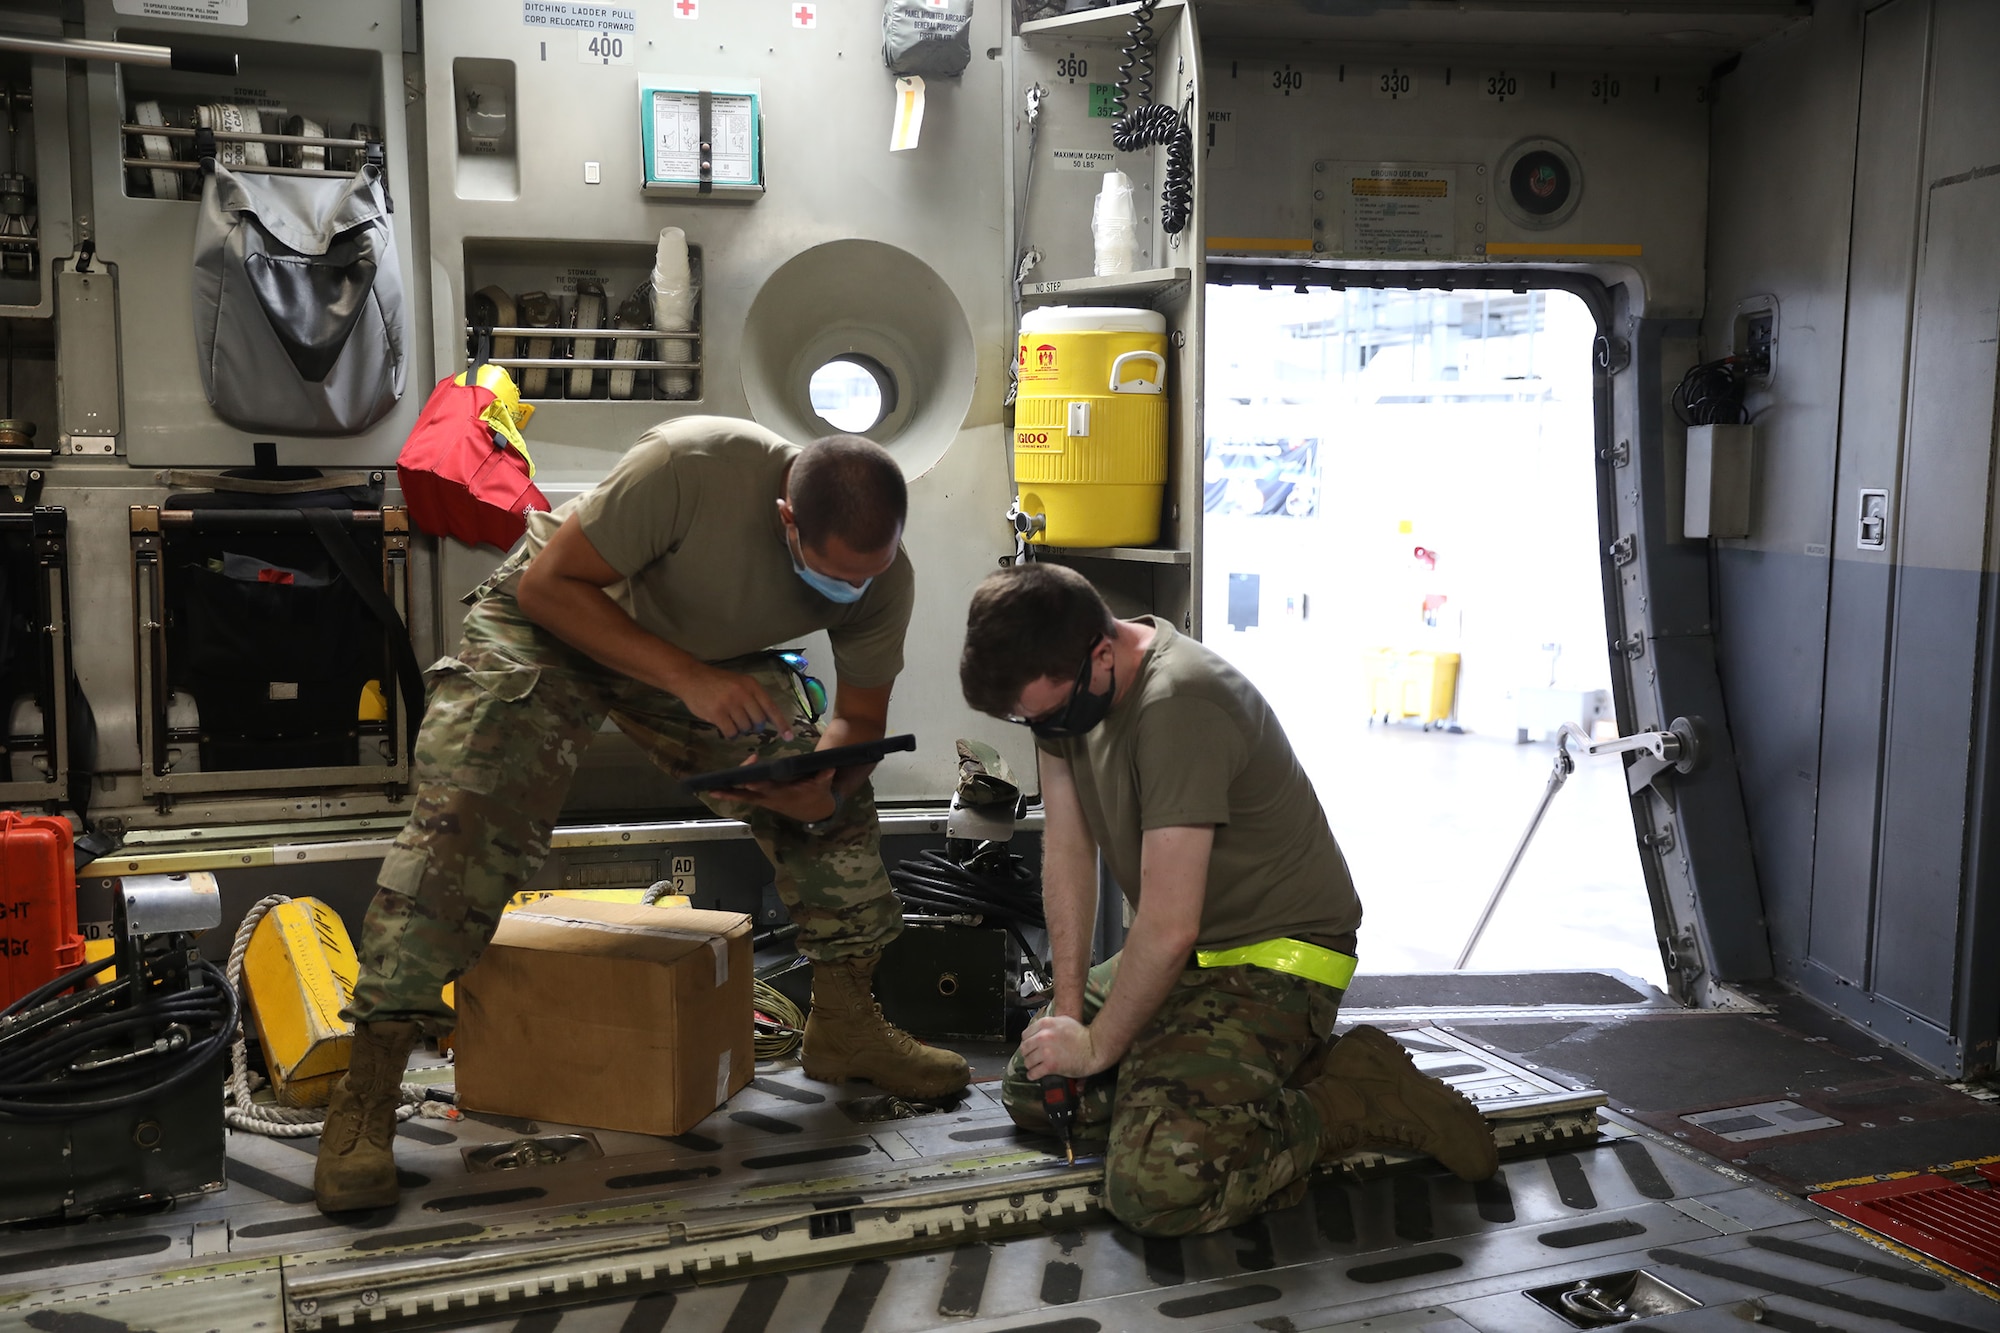 Senior Airmen Derek Reighard and Matthew Fahs, 445th Aircraft Maintenance Squadron crew chiefs, reinstall rails on a 445th Airlift Wing C-17 Globemaster III at Wright Patterson Air Force Base, Ohio Aug. 22, 2021.  Rails of the aircraft are inspected regularly for mechanical integrity and cleanliness.